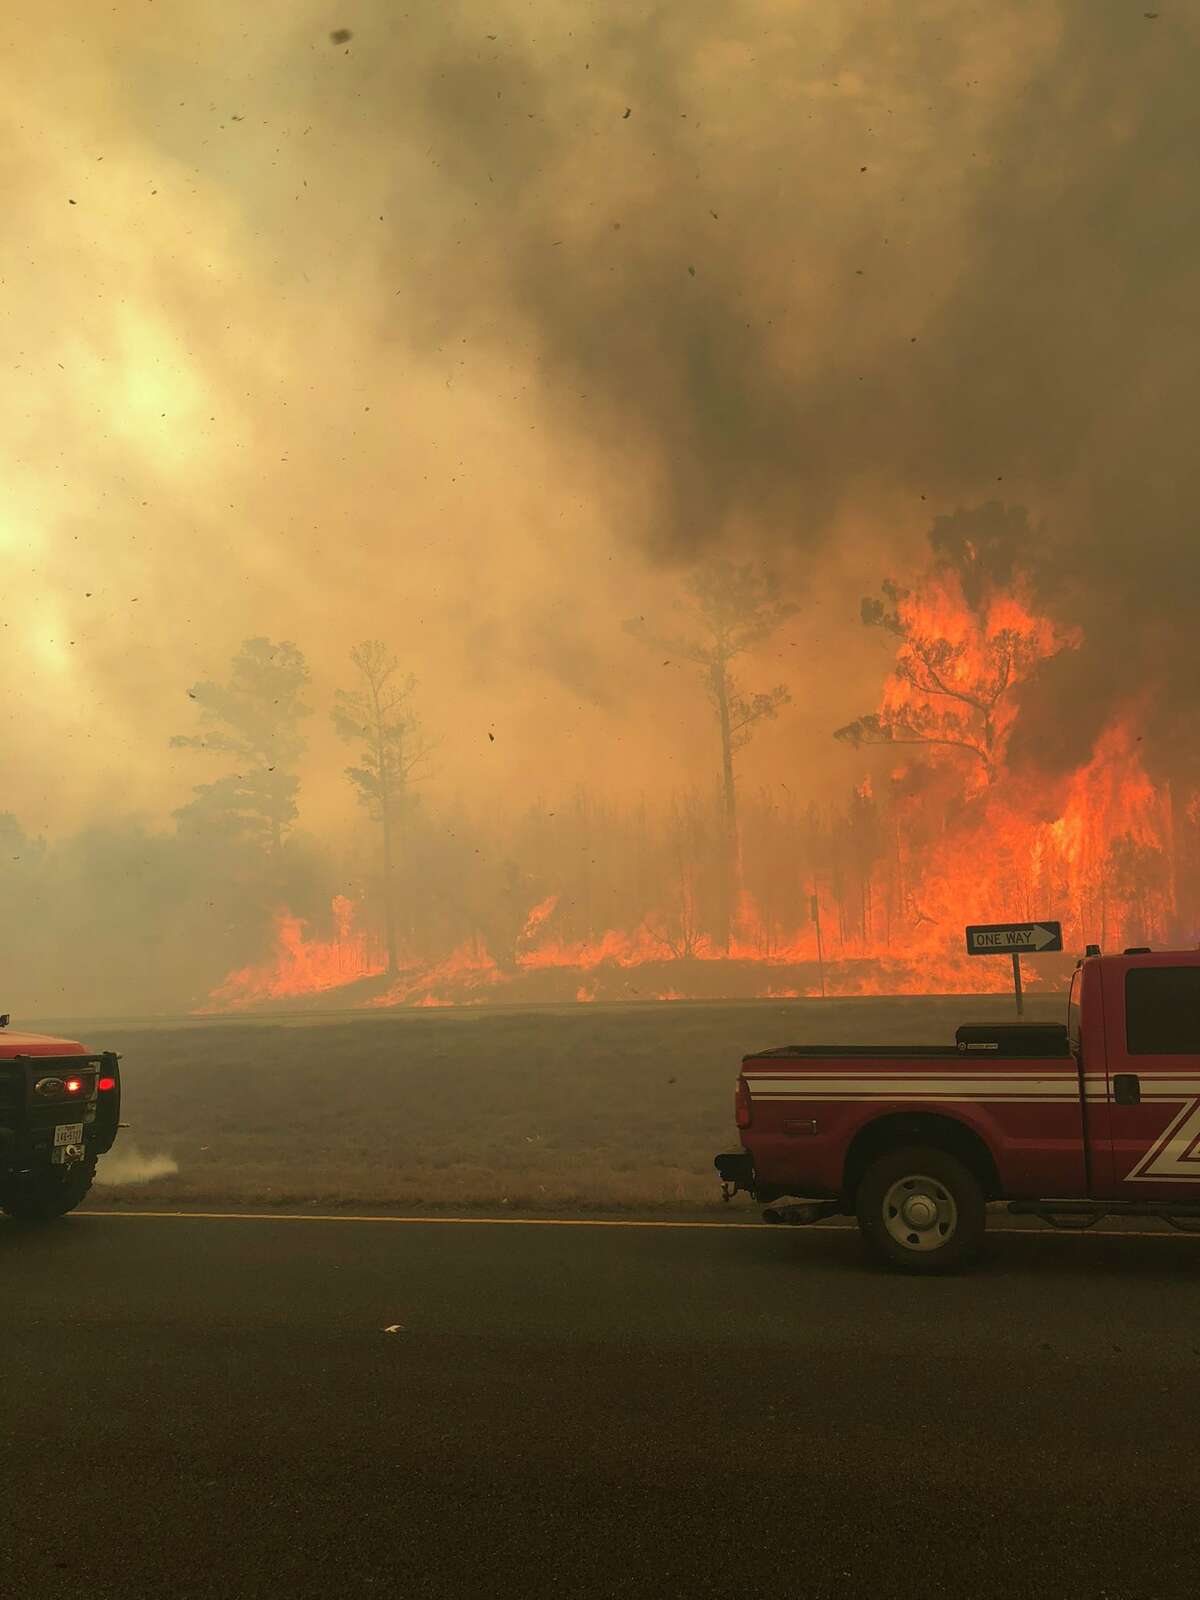 Texas A&M Forest Service said the Bastrop wildfire has spread over 700 acres and is 30 percent contained as of 9 a.m. on January 19. 